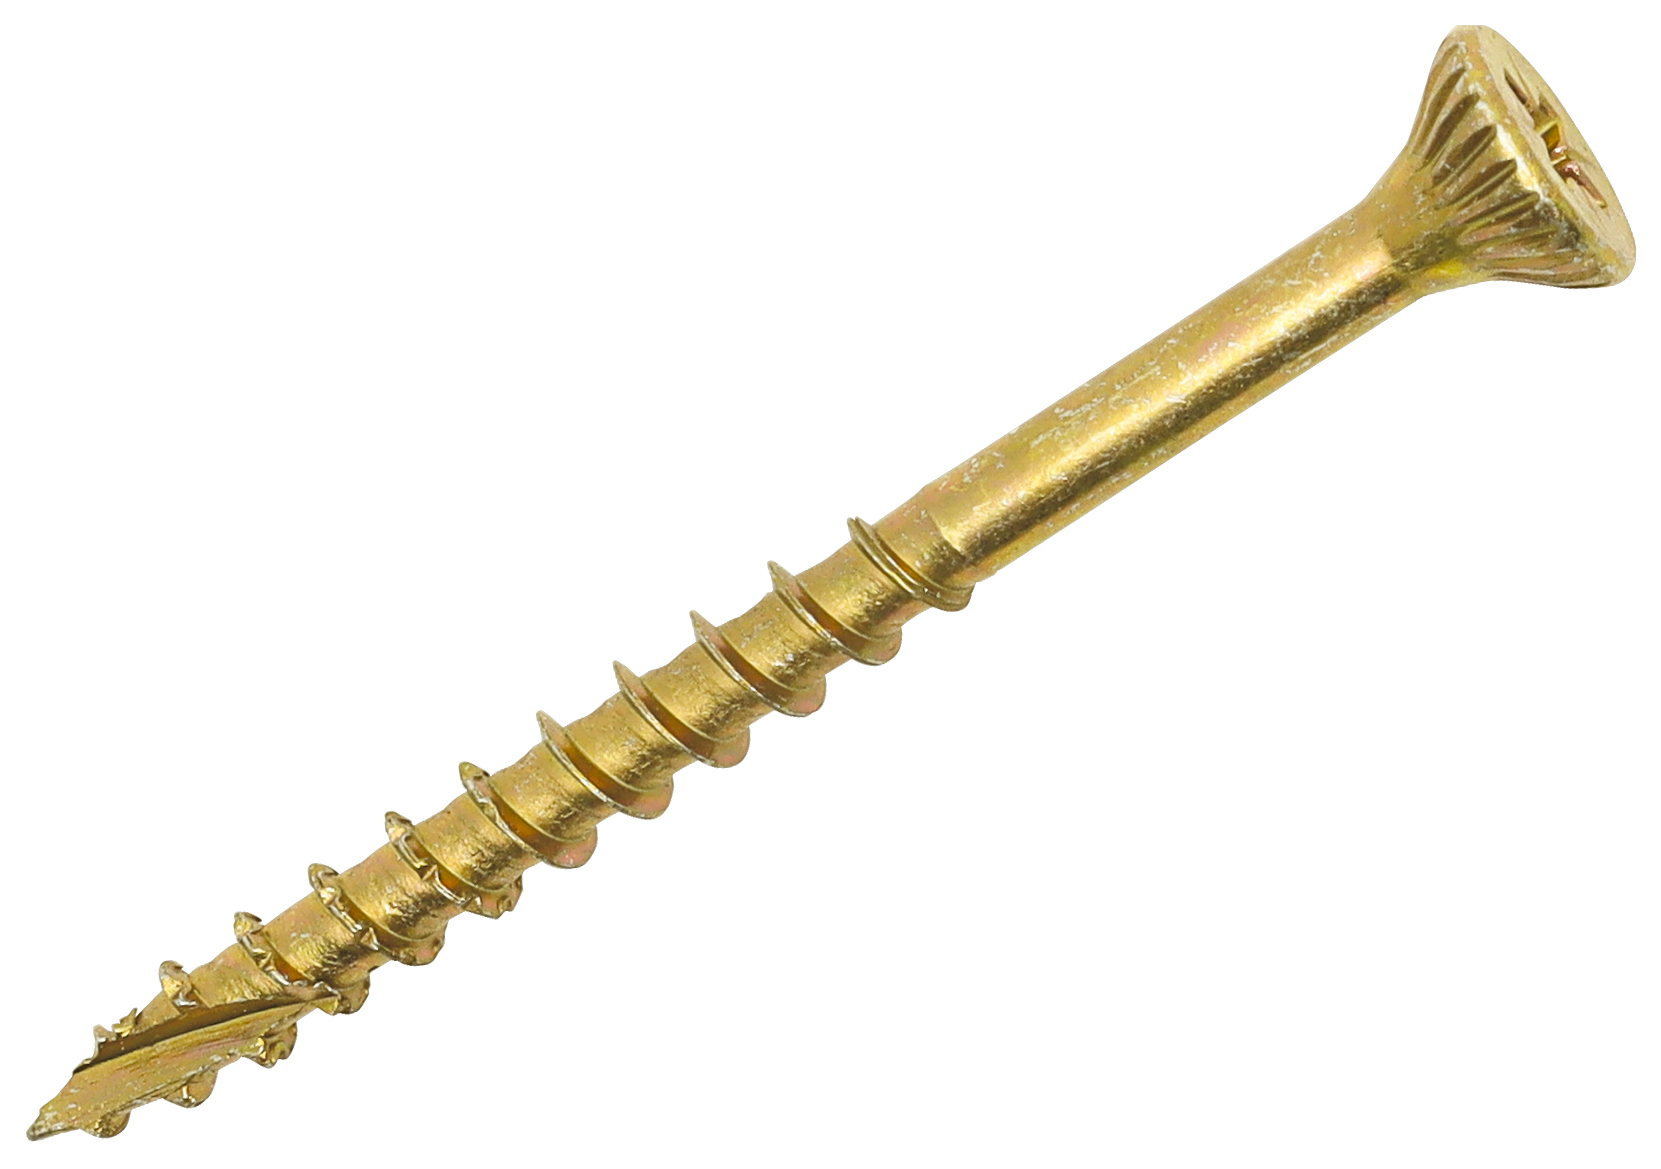 Optimaxx PZ Countersunk Passivated Double Reinforced Wood Screw Maxxtub - 5 x 60mm - Pack of 500